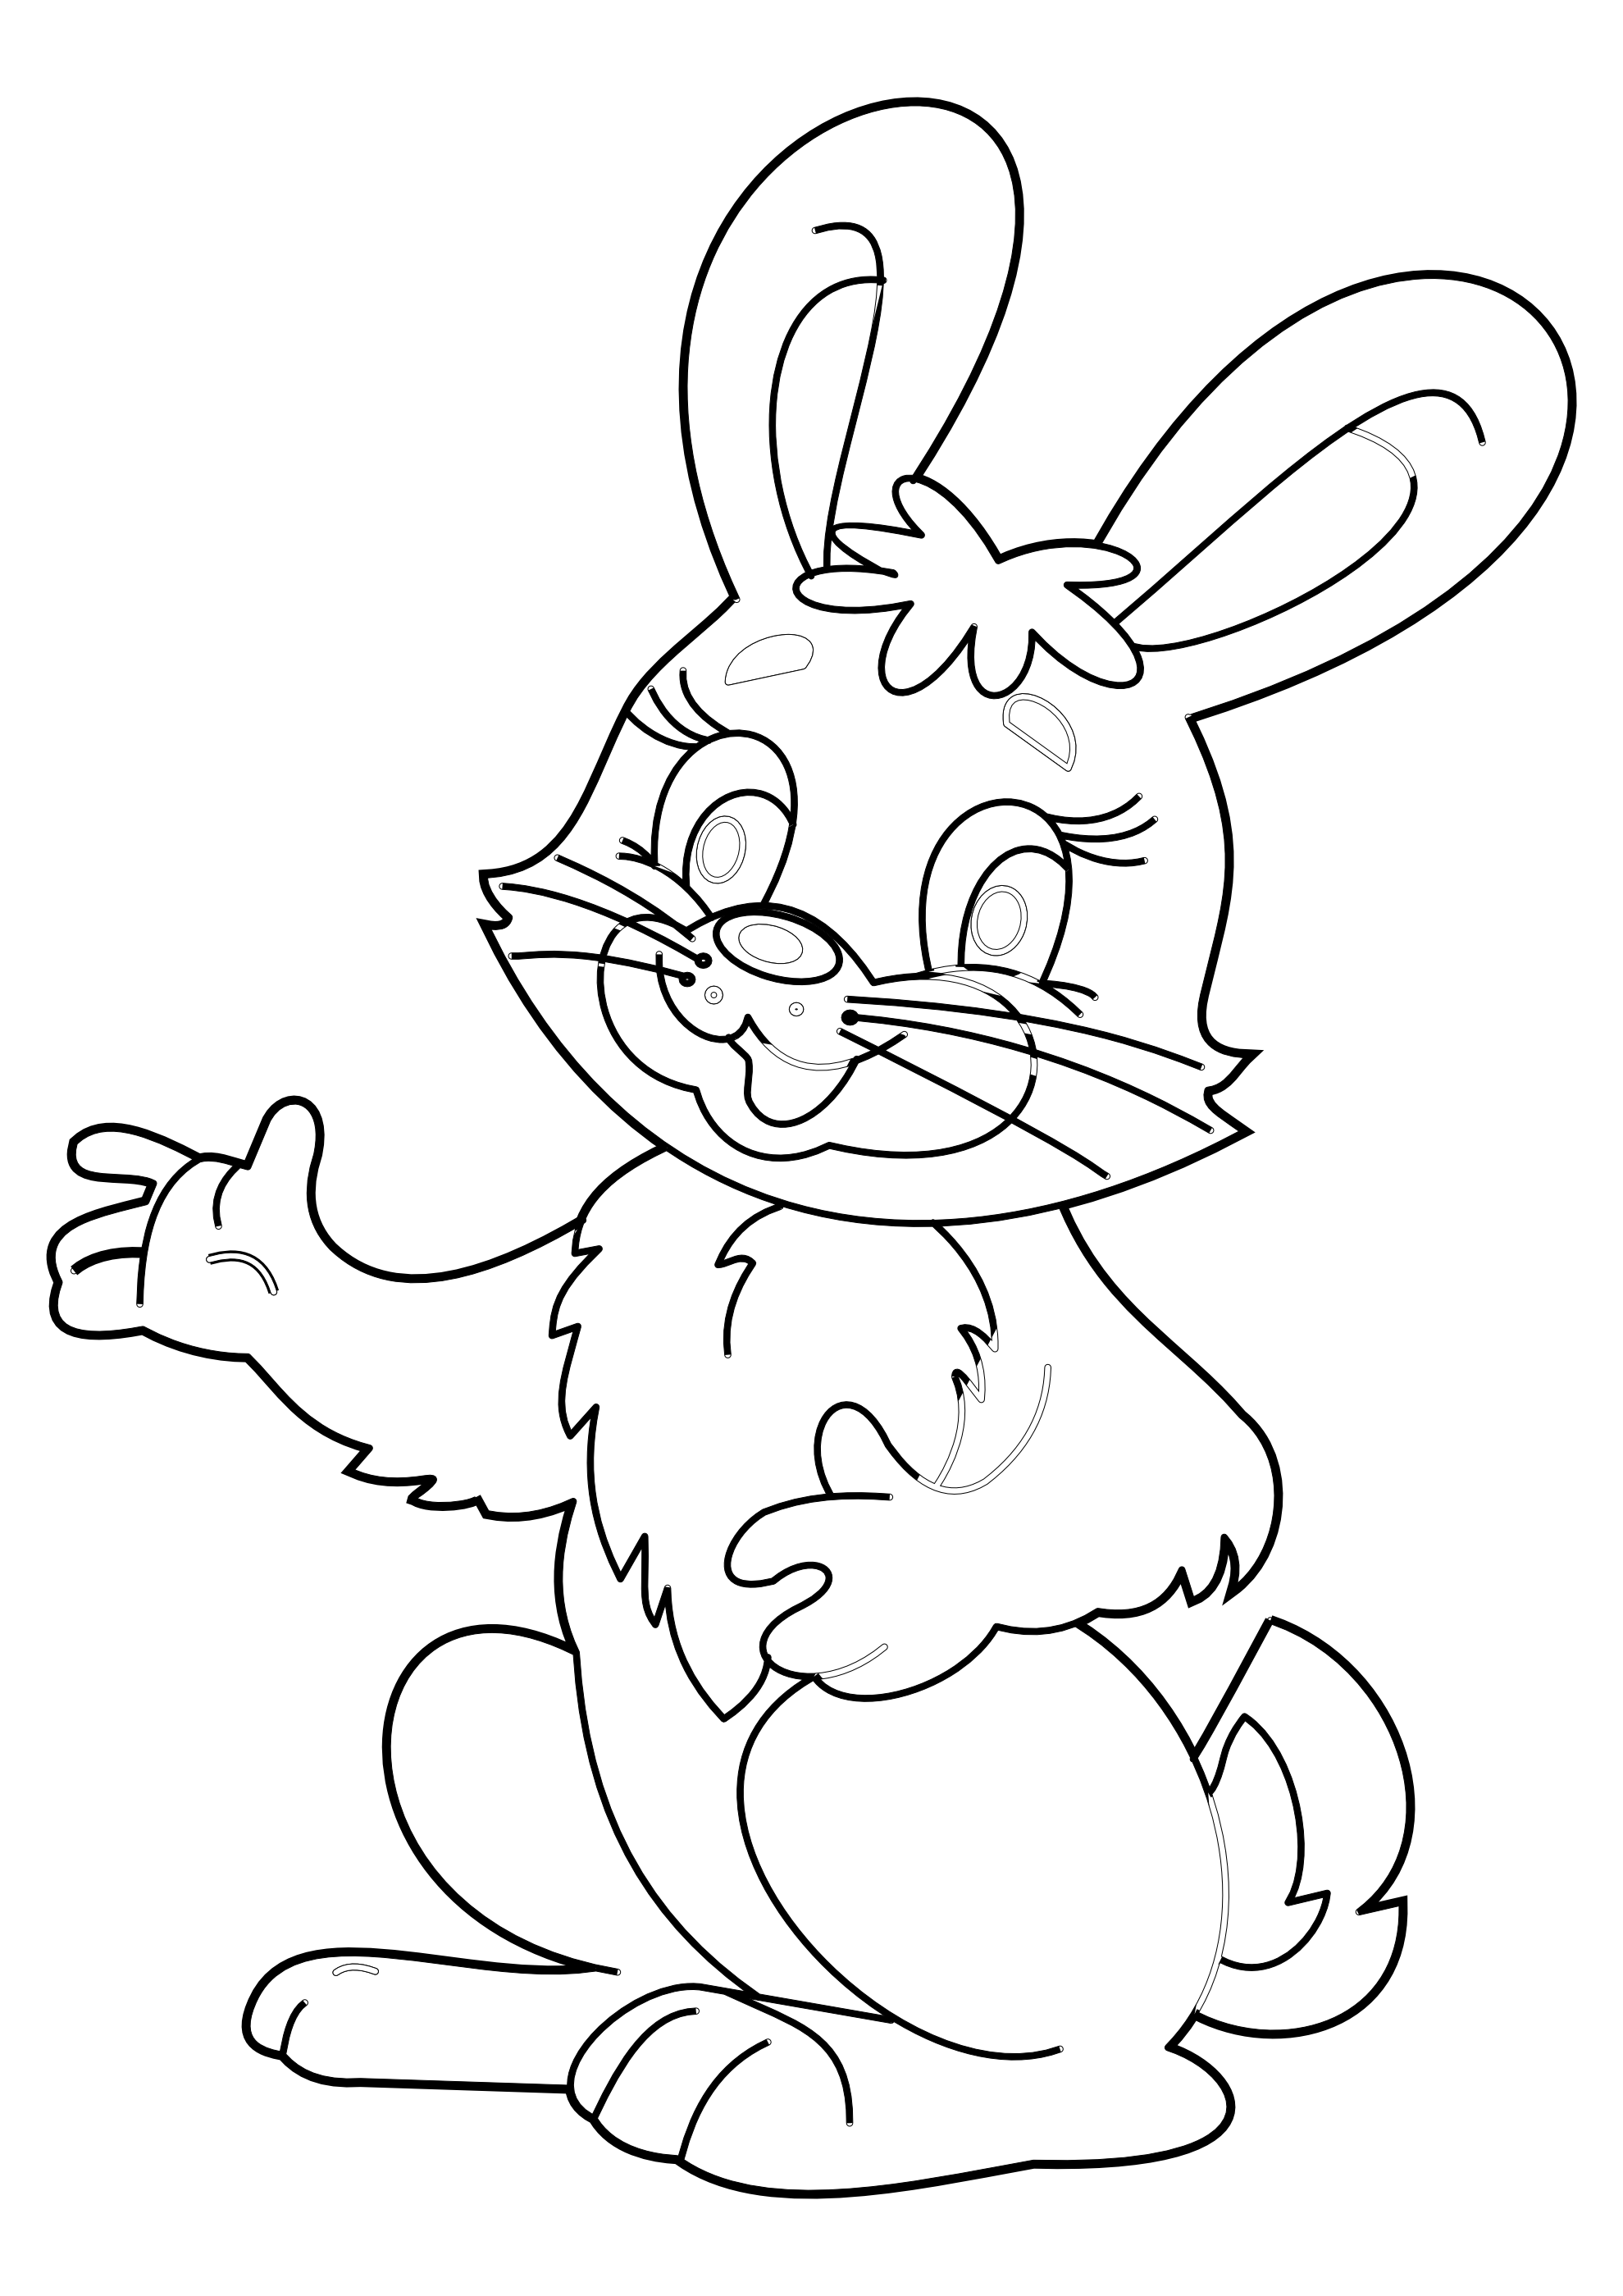 Easter clipart black and white, Easter black and white Transparent FREE ...